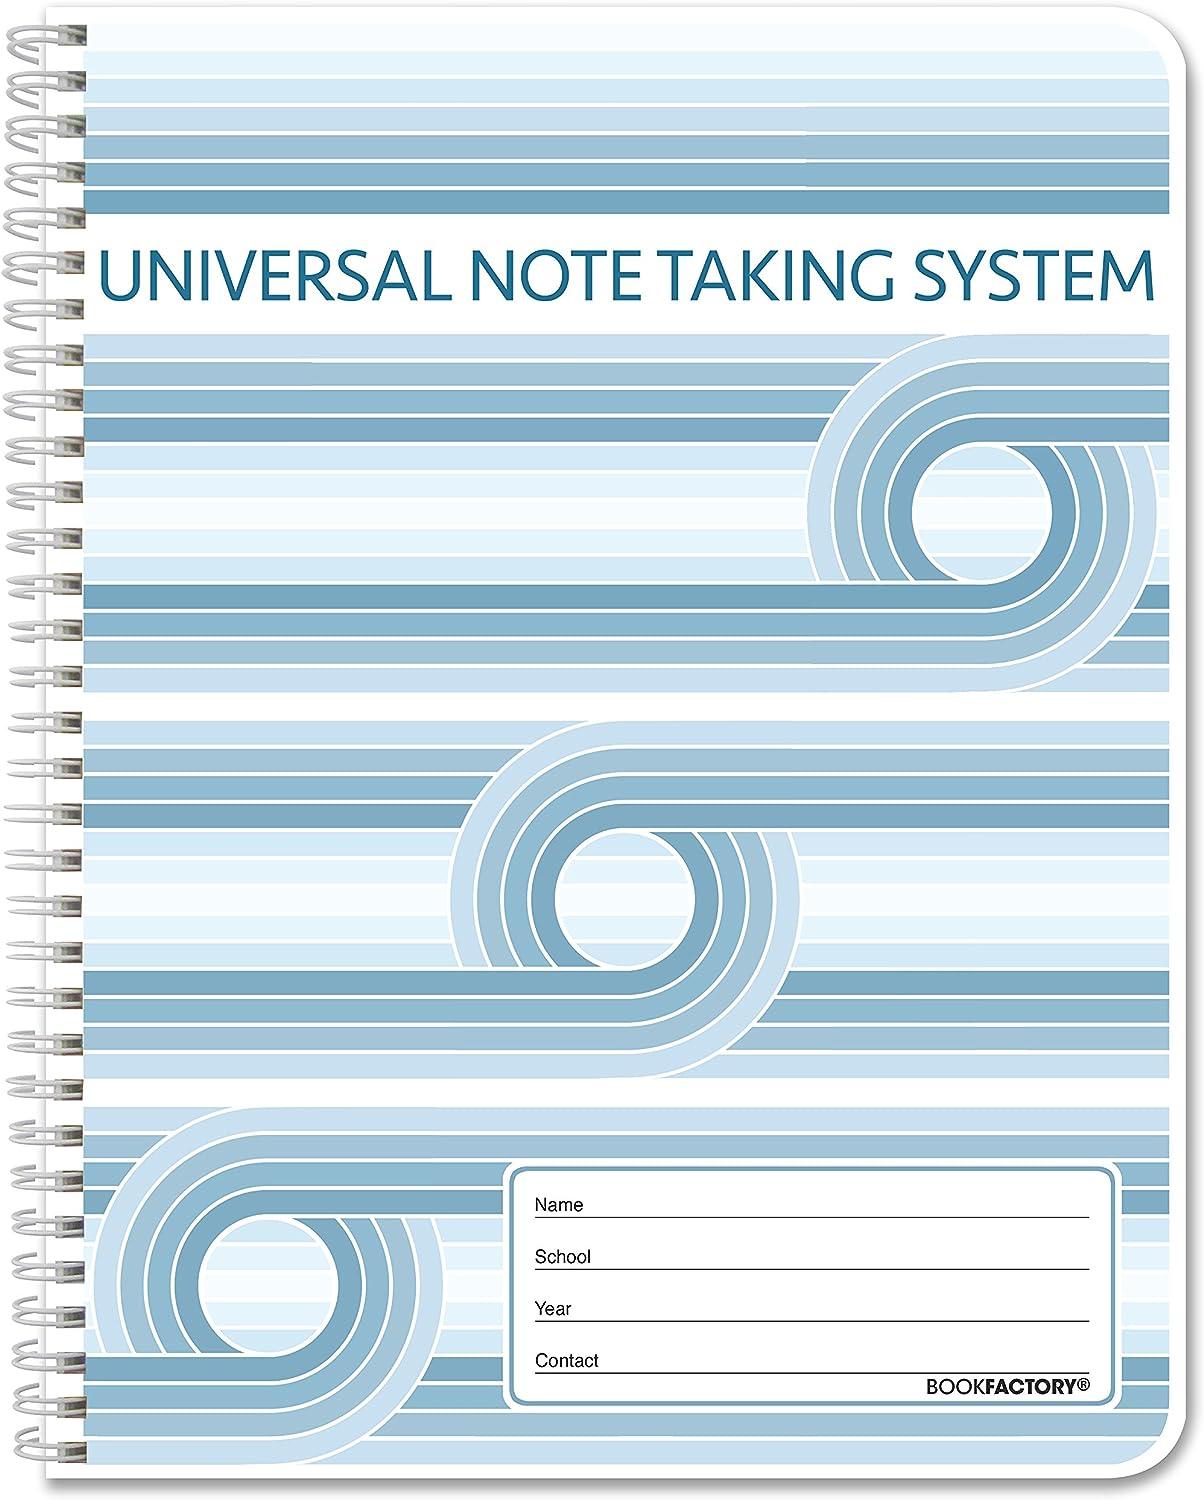 bookfactory universal note taking system cornell notes / notetaking notebook 120 pages 8 1/2